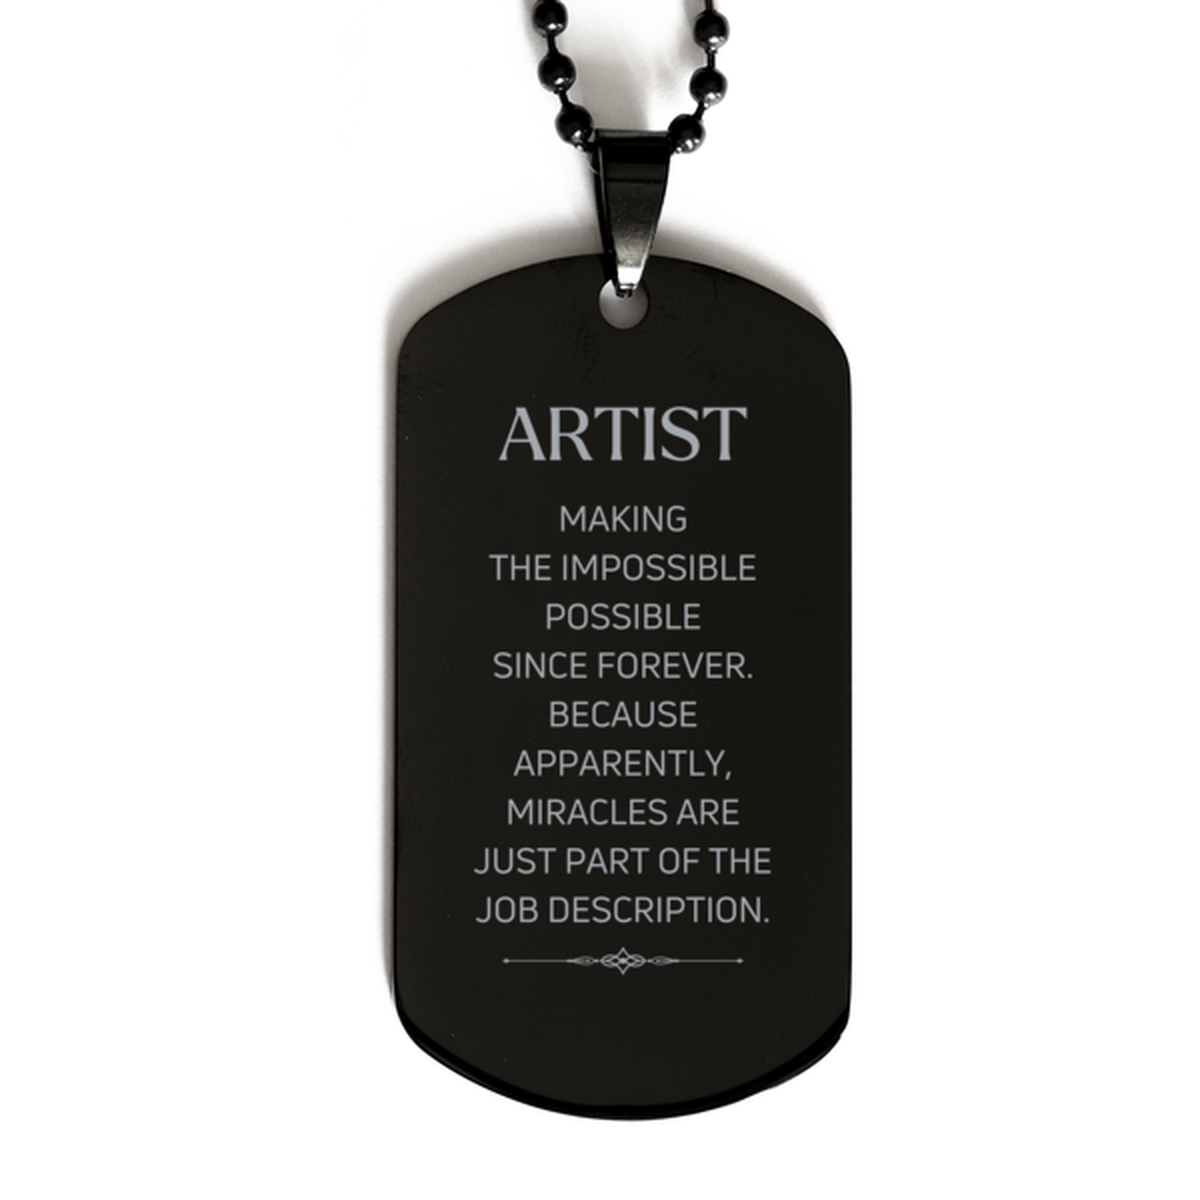 Funny Artist Gifts, Miracles are just part of the job description, Inspirational Birthday Black Dog Tag For Artist, Men, Women, Coworkers, Friends, Boss